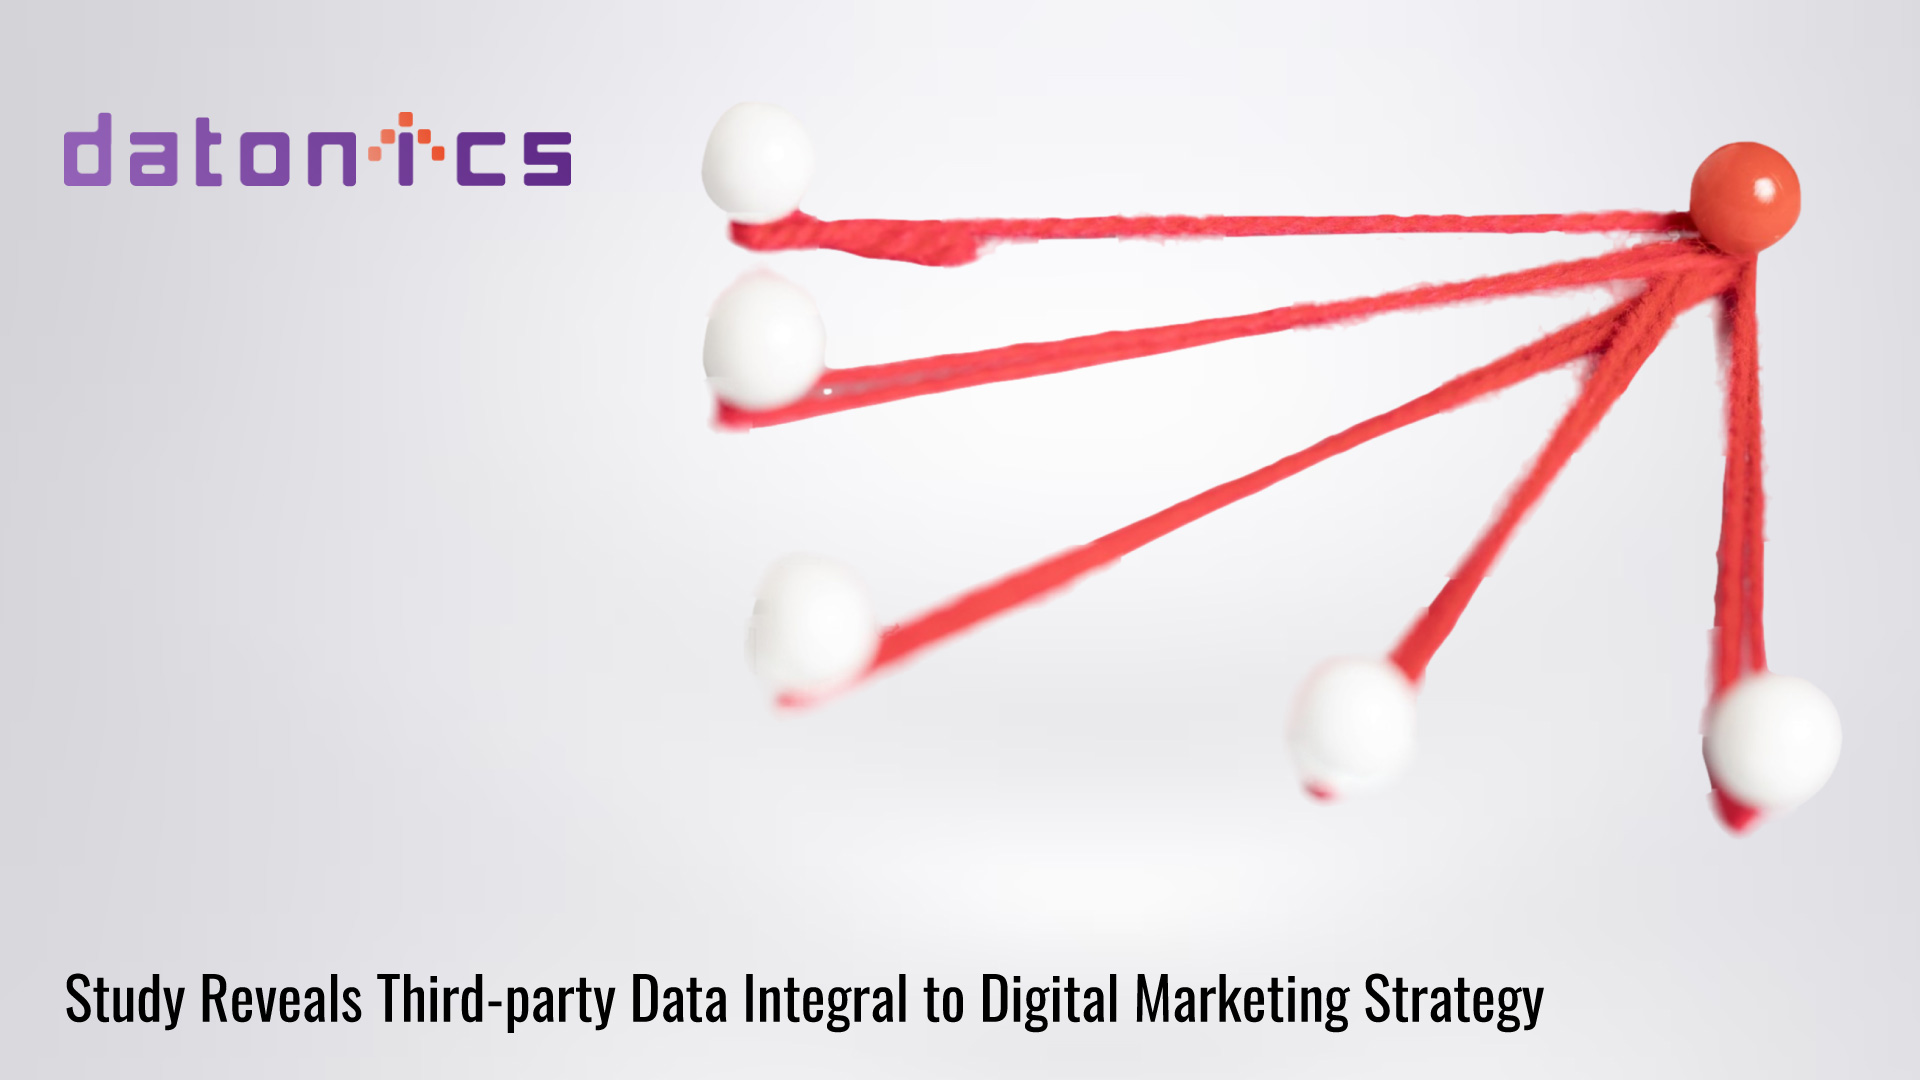 Datonics Study Reveals Third-party Data Remains an Integral Part of Digital Marketing Strategy